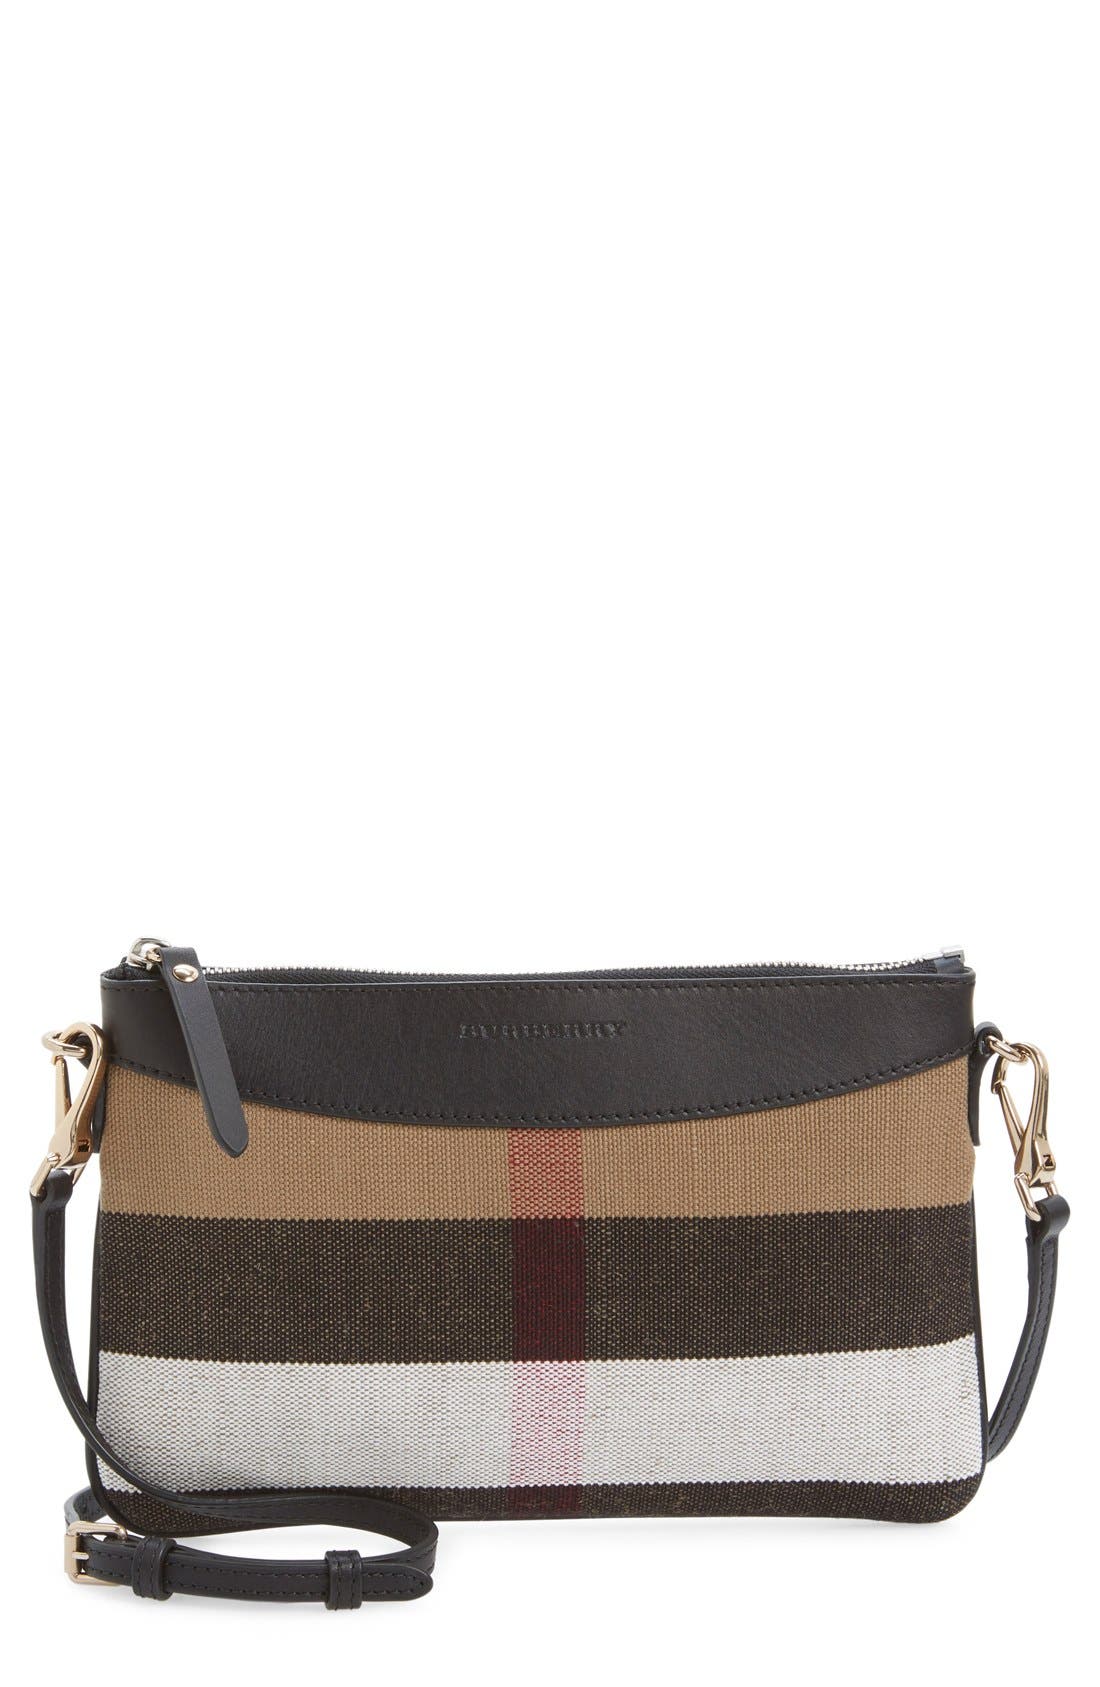 burberry totes nordstrom